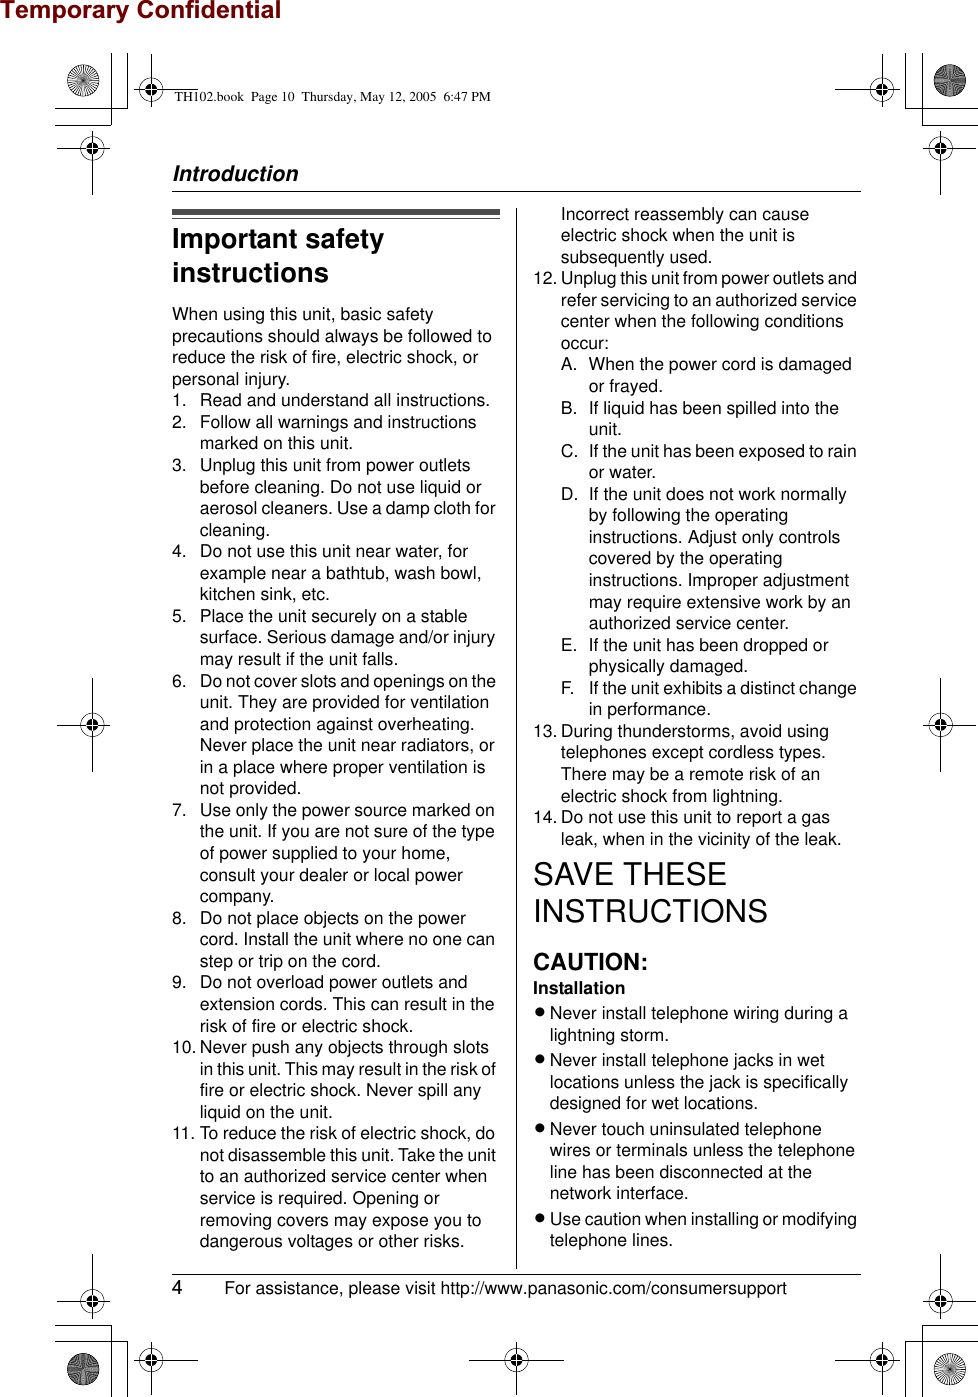 Temporary ConfidentialIntroduction4 For assistance, please visit http://www.panasonic.com/consumersupportImportant safety instructionsWhen using this unit, basic safety precautions should always be followed to reduce the risk of fire, electric shock, or personal injury.1. Read and understand all instructions.2. Follow all warnings and instructions marked on this unit.3. Unplug this unit from power outlets before cleaning. Do not use liquid or aerosol cleaners. Use a damp cloth for cleaning.4. Do not use this unit near water, for example near a bathtub, wash bowl, kitchen sink, etc.5. Place the unit securely on a stable surface. Serious damage and/or injury may result if the unit falls.6. Do not cover slots and openings on the unit. They are provided for ventilation and protection against overheating. Never place the unit near radiators, or in a place where proper ventilation is not provided.7. Use only the power source marked on the unit. If you are not sure of the type of power supplied to your home, consult your dealer or local power company.8. Do not place objects on the power cord. Install the unit where no one can step or trip on the cord.9. Do not overload power outlets and extension cords. This can result in the risk of fire or electric shock.10. Never push any objects through slots in this unit. This may result in the risk of fire or electric shock. Never spill any liquid on the unit.11. To reduce the risk of electric shock, do not disassemble this unit. Take the unit to an authorized service center when service is required. Opening or removing covers may expose you to dangerous voltages or other risks. Incorrect reassembly can cause electric shock when the unit is subsequently used.12. Unplug this unit from power outlets and refer servicing to an authorized service center when the following conditions occur:A. When the power cord is damaged or frayed.B. If liquid has been spilled into the unit.C. If the unit has been exposed to rain or water.D. If the unit does not work normally by following the operating instructions. Adjust only controls covered by the operating instructions. Improper adjustment may require extensive work by an authorized service center.E. If the unit has been dropped or physically damaged.F. If the unit exhibits a distinct change in performance.13. During thunderstorms, avoid using telephones except cordless types. There may be a remote risk of an electric shock from lightning.14. Do not use this unit to report a gas leak, when in the vicinity of the leak.SAVE THESE INSTRUCTIONSCAUTION:InstallationLNever install telephone wiring during a lightning storm.LNever install telephone jacks in wet locations unless the jack is specifically designed for wet locations.LNever touch uninsulated telephone wires or terminals unless the telephone line has been disconnected at the network interface.LUse caution when installing or modifying telephone lines.TH102.book  Page 10  Thursday, May 12, 2005  6:47 PM